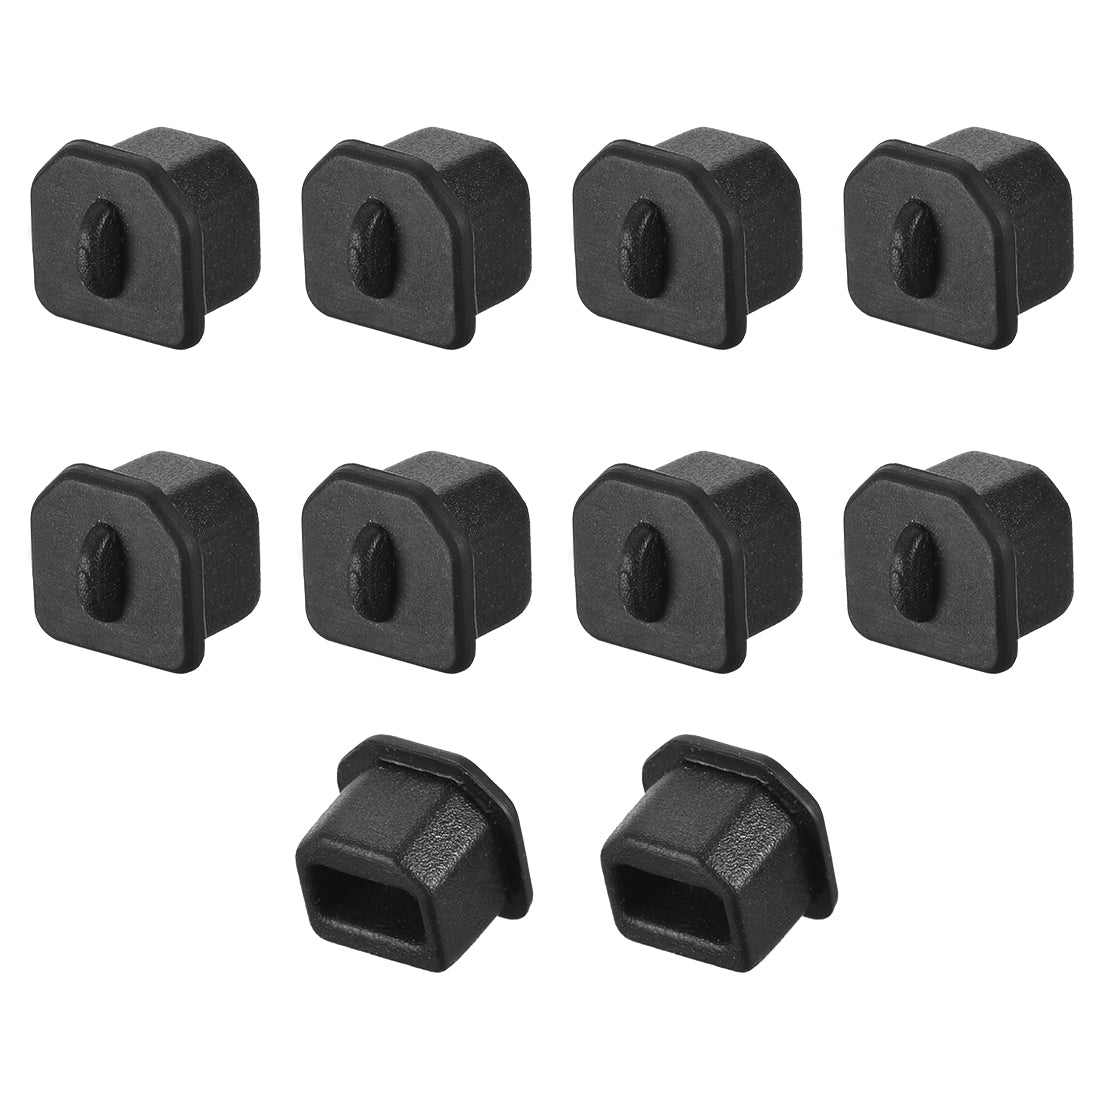 uxcell Uxcell Silicone USB B Anti-Dust Stopper Cap Cover Black 10pcs